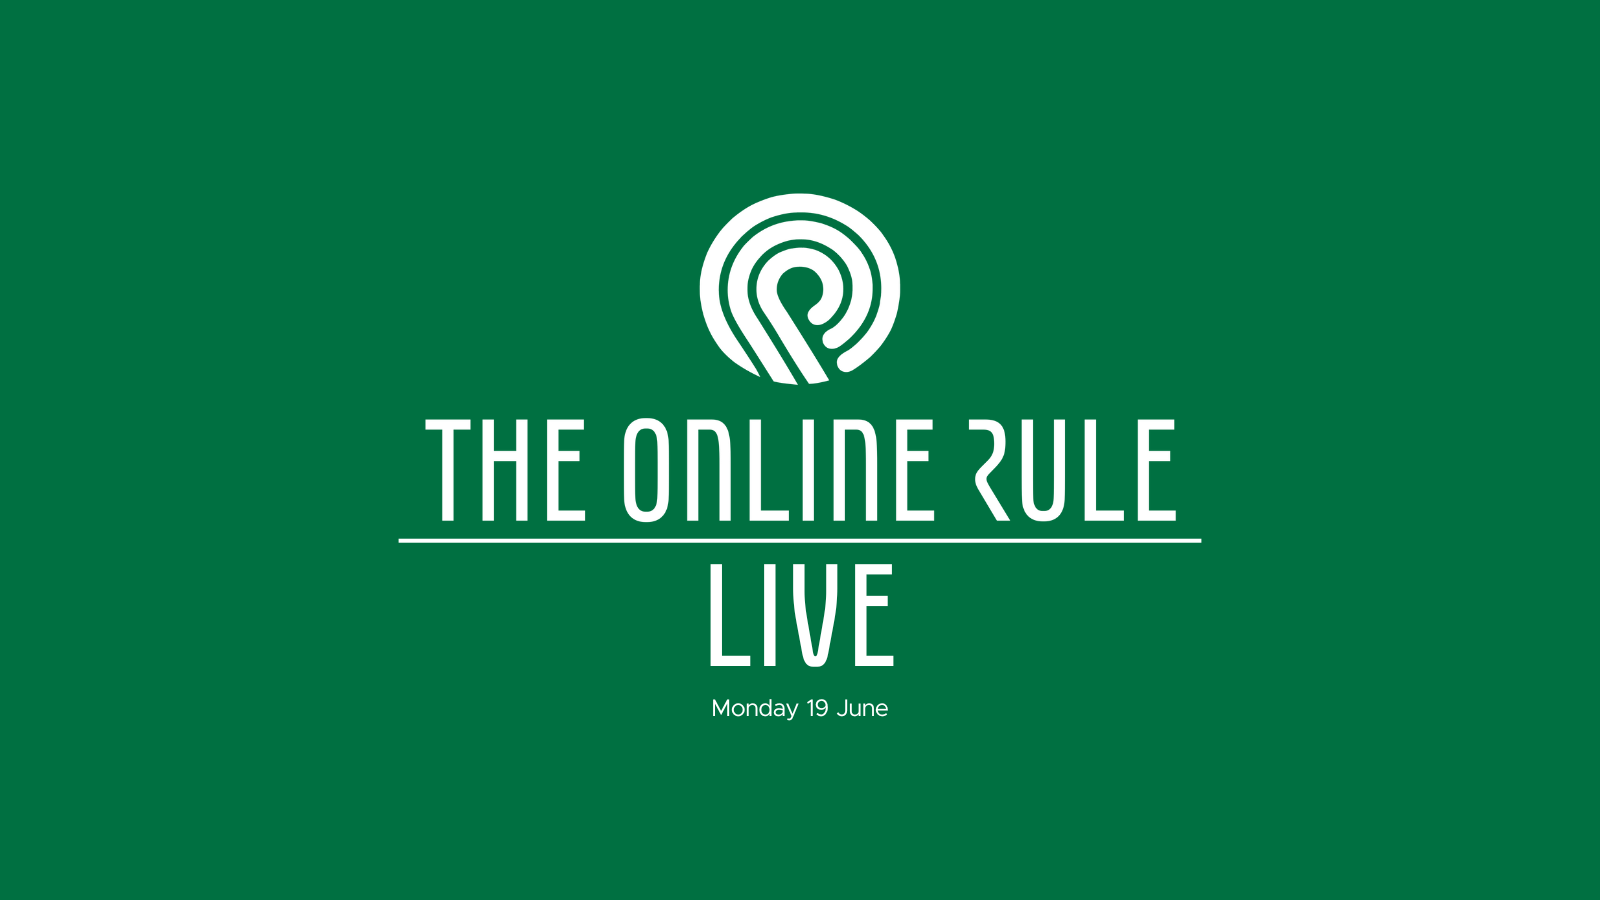 Catch-up: The Online Rule Live 2023